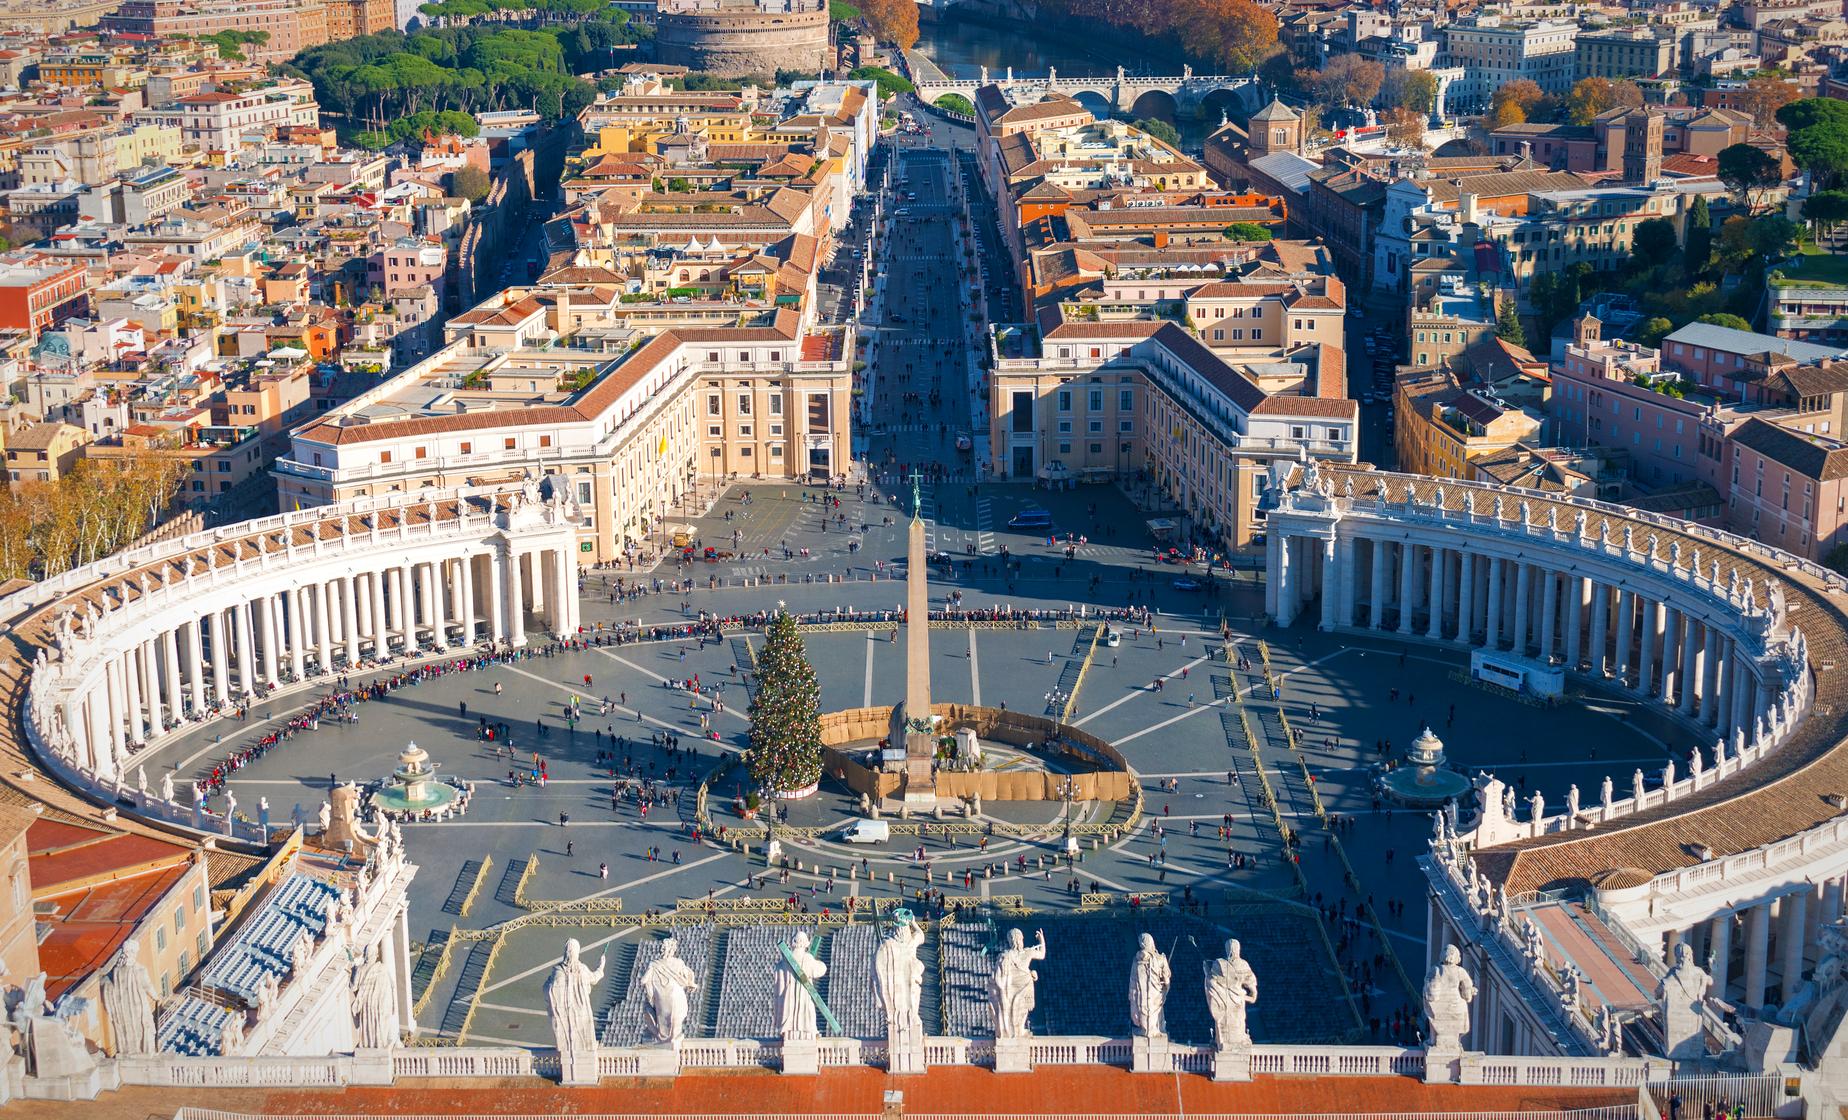 Private Vatican, Colosseum and Old Rome Tour (Sistine Chapel, St. Peter's Basilica)